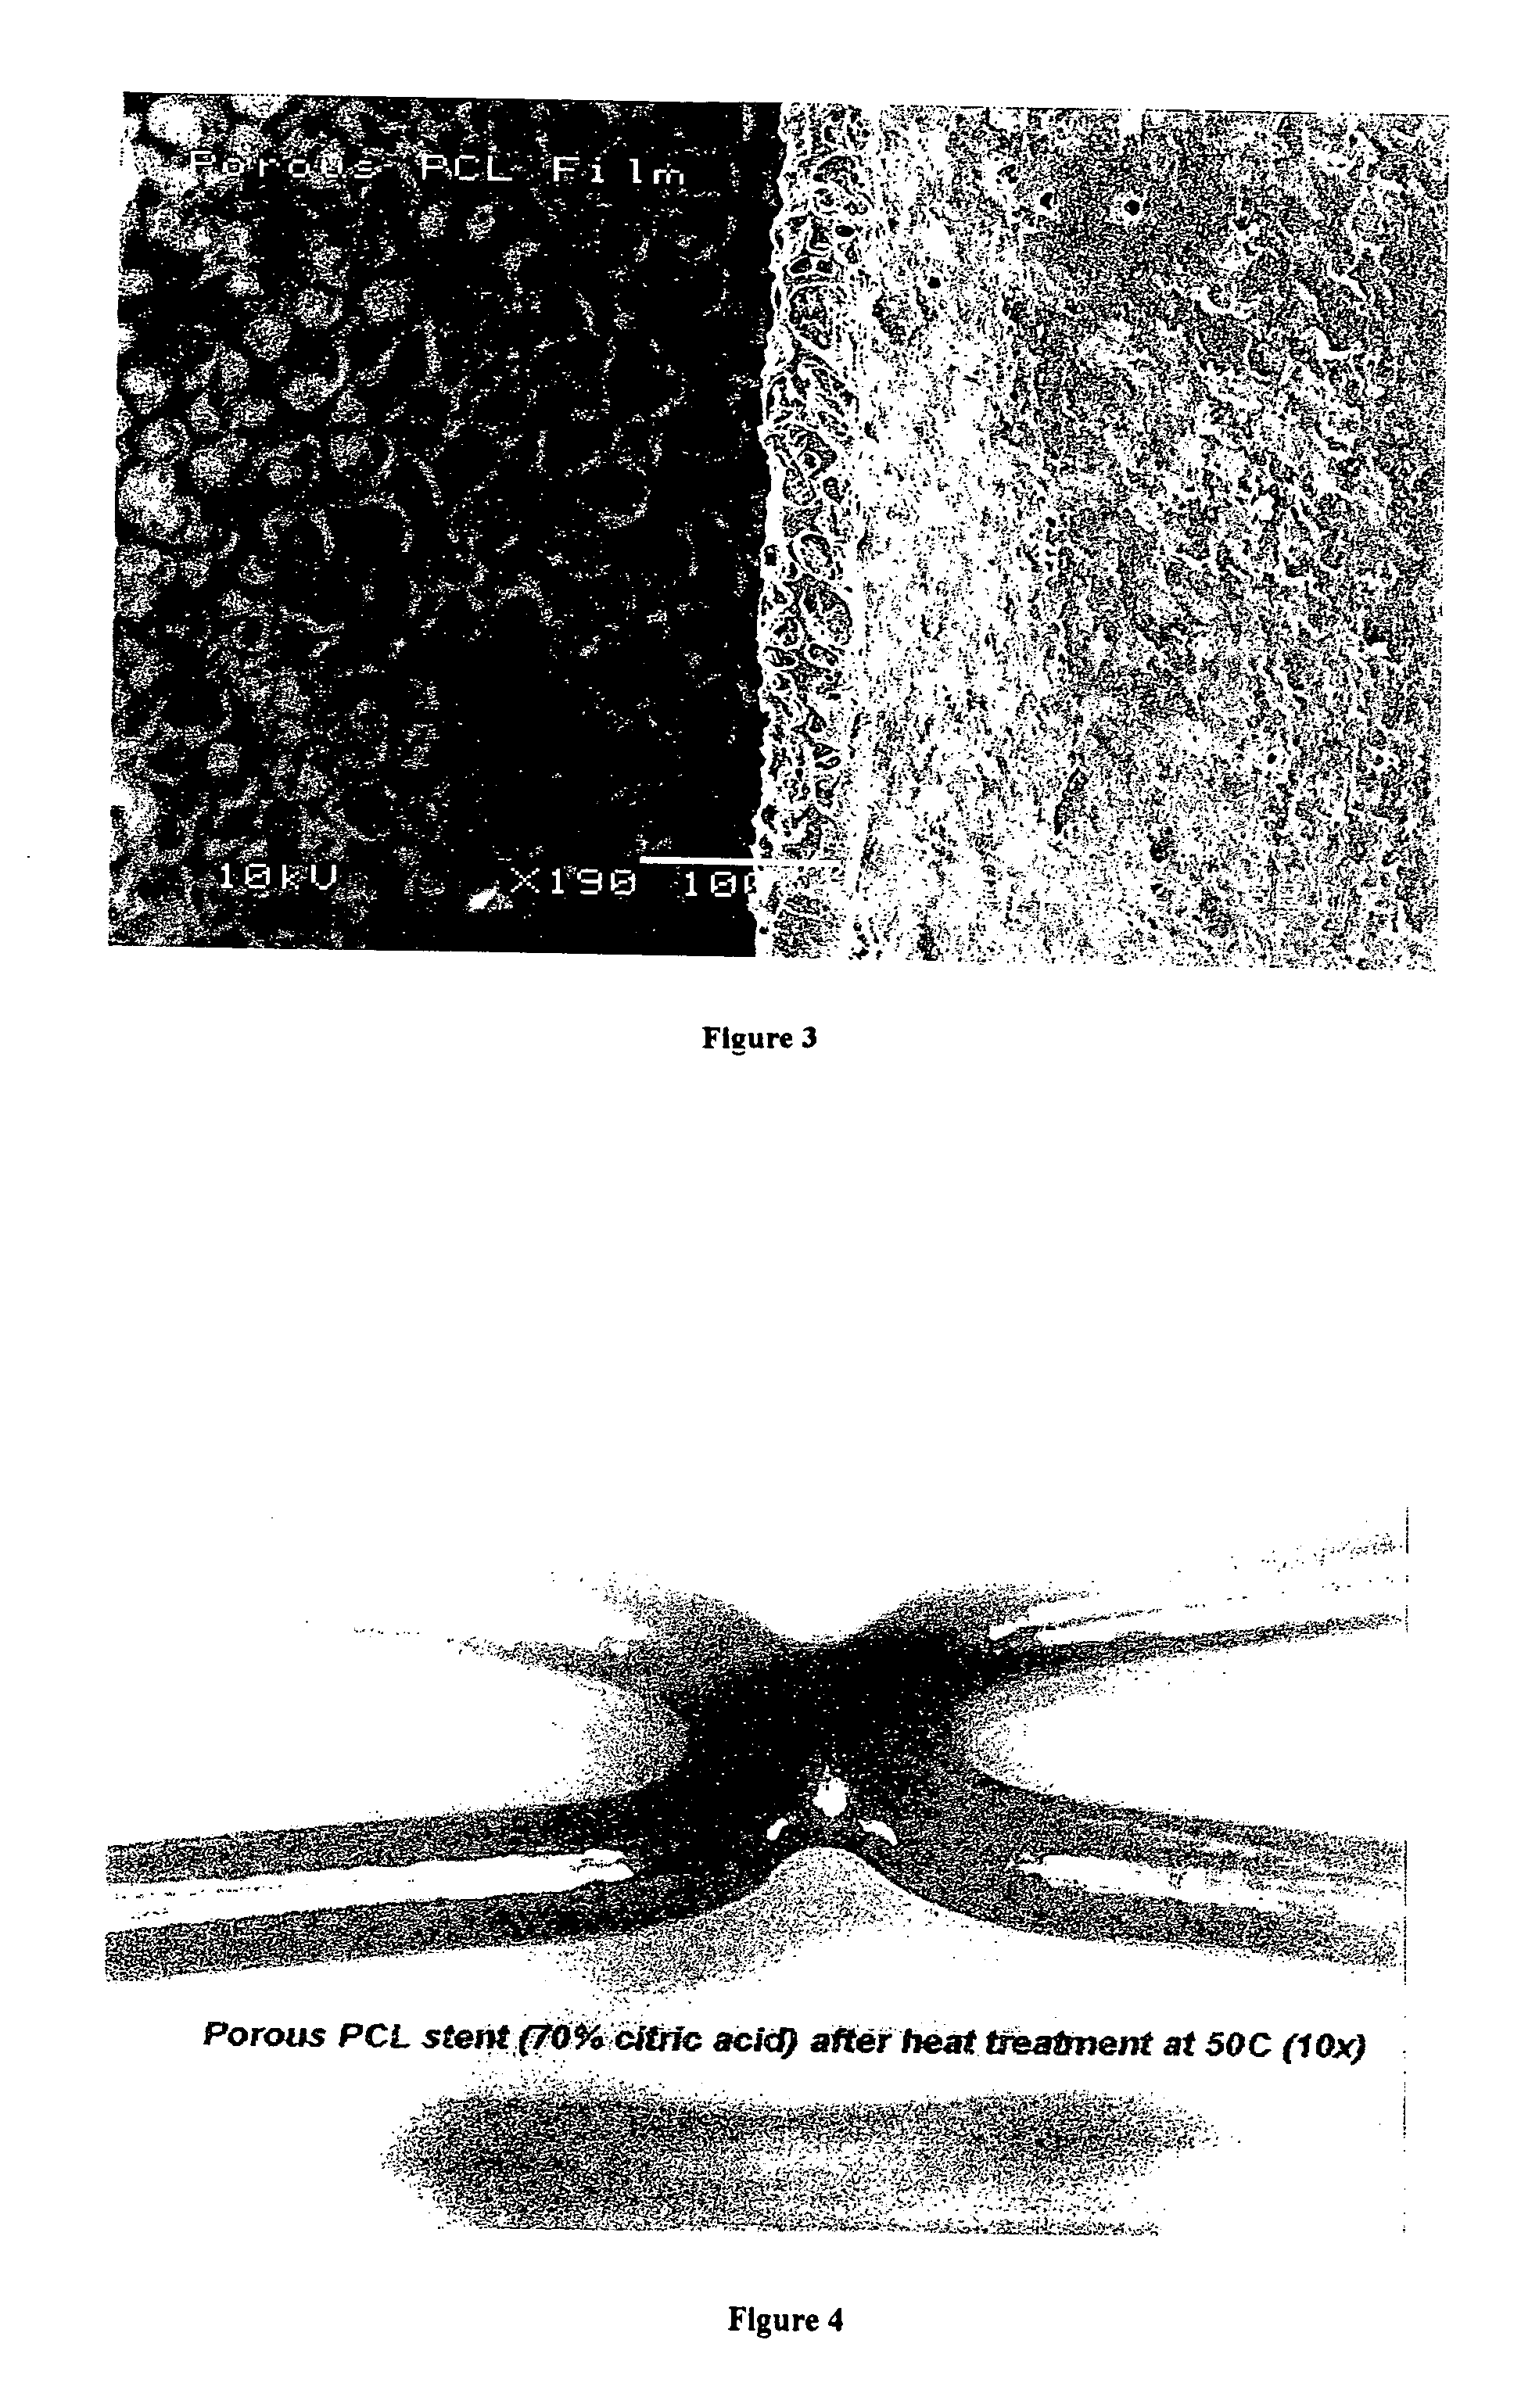 Medical device having a surface including a biologically active agent therein, and methods